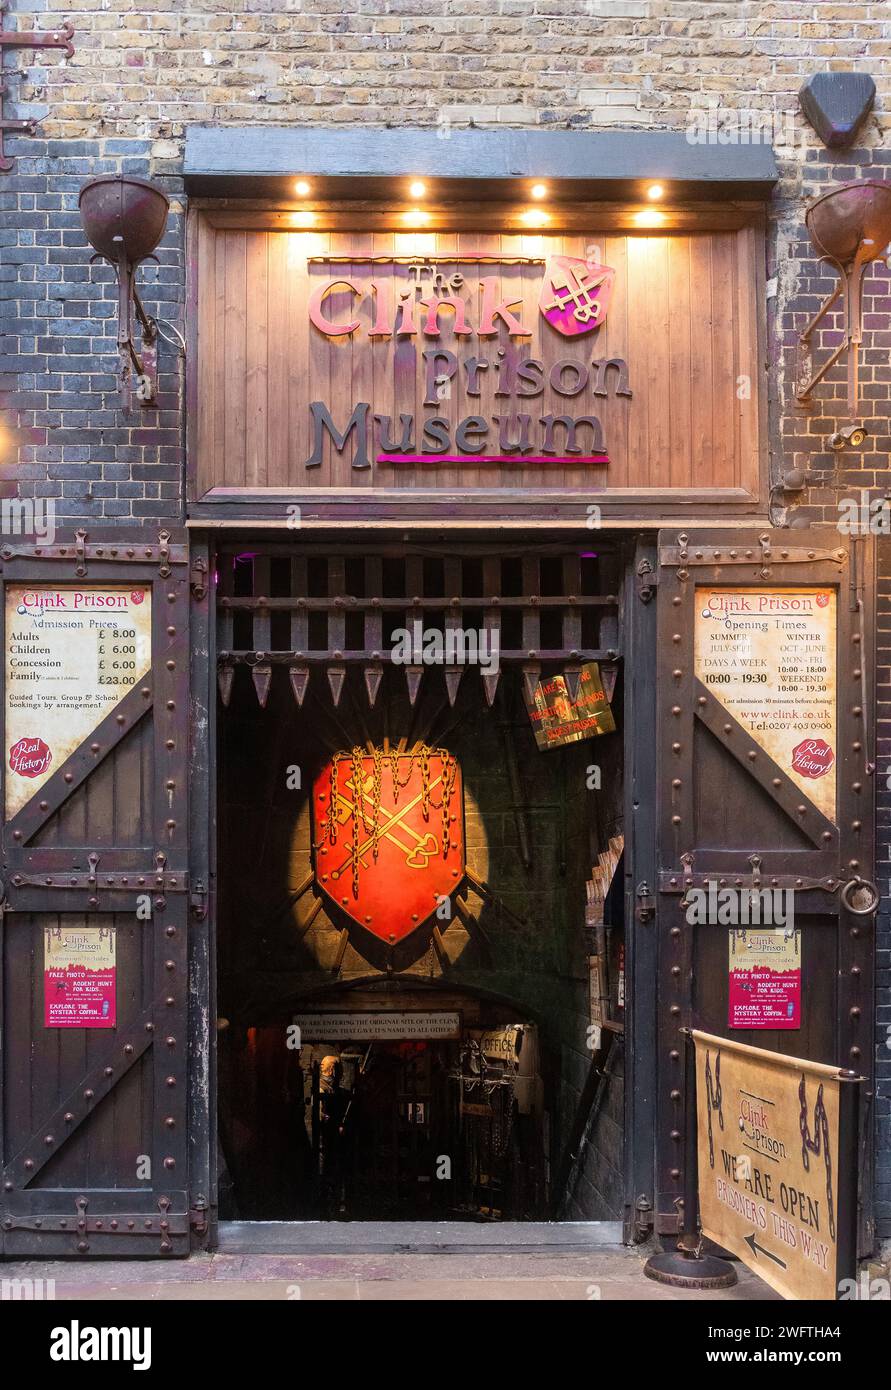 The Clink Prison Museum, a tourist attraction in London, England, UK. London visitor attractions Stock Photo